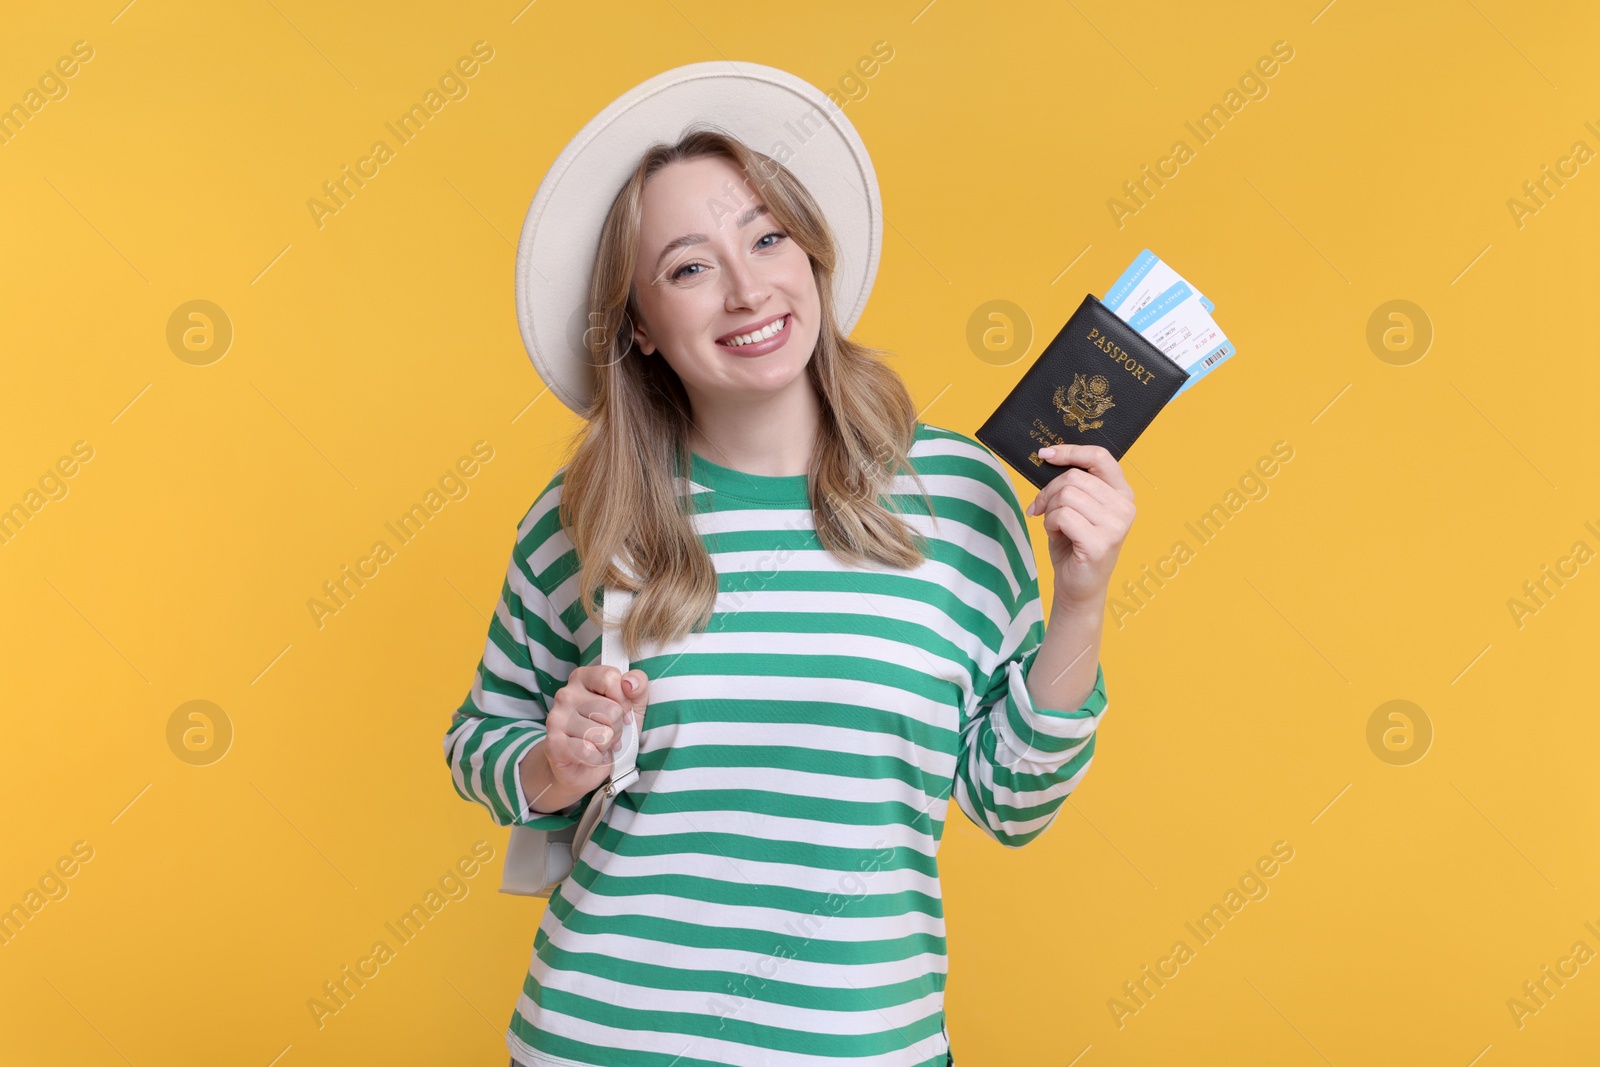 Photo of Happy young woman with passport, ticket and hat on yellow background